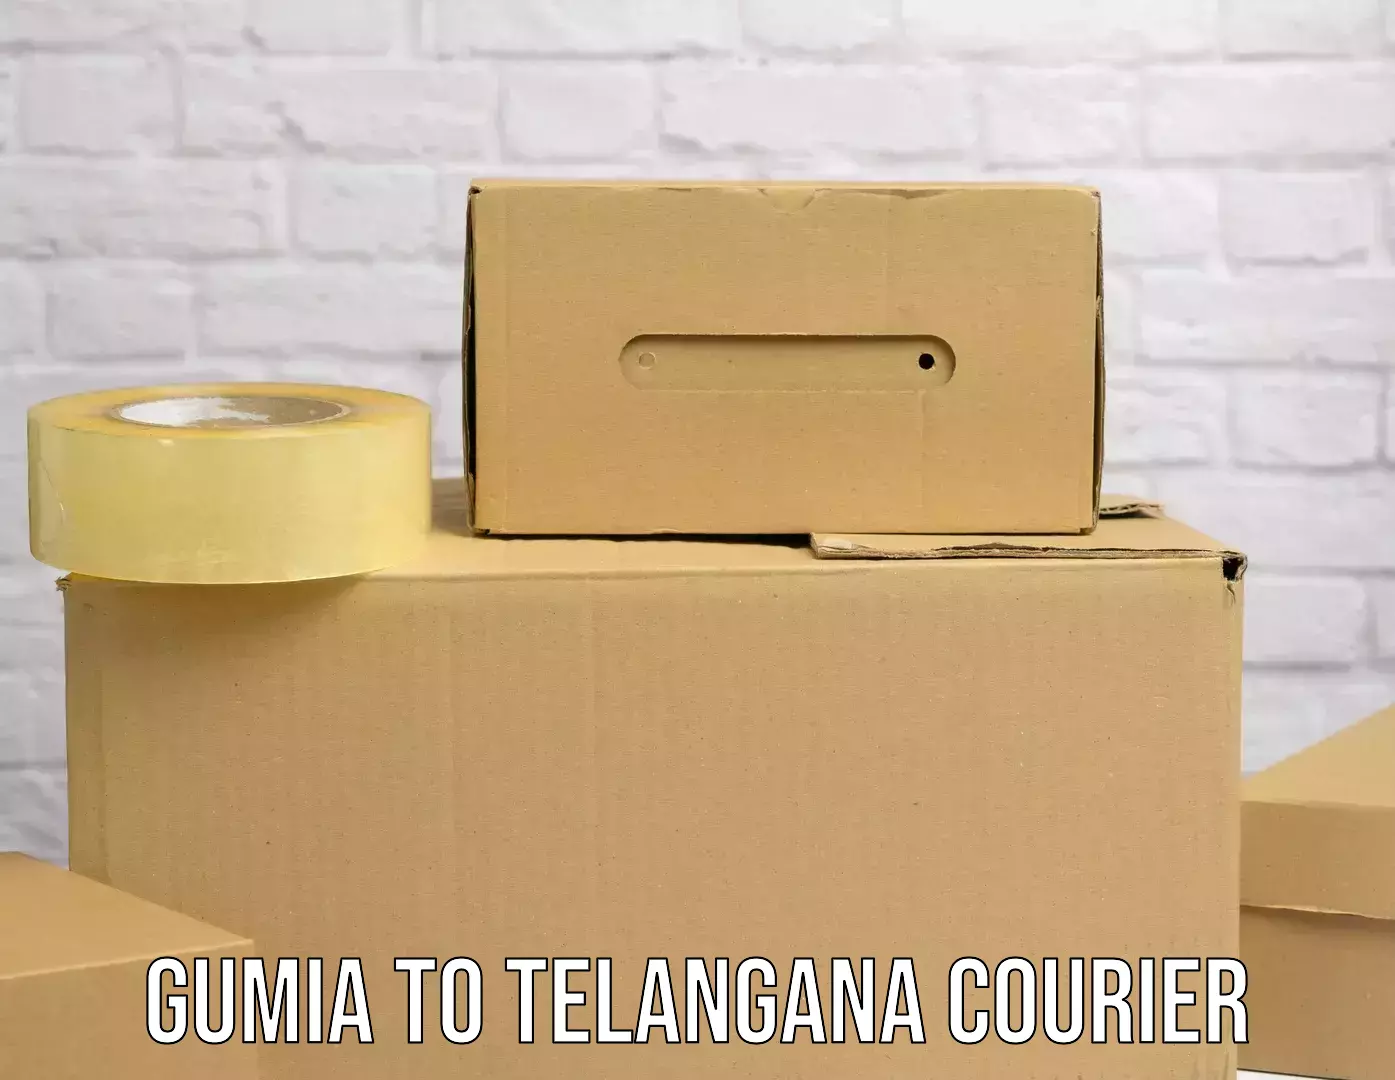 State-of-the-art courier technology in Gumia to Secunderabad